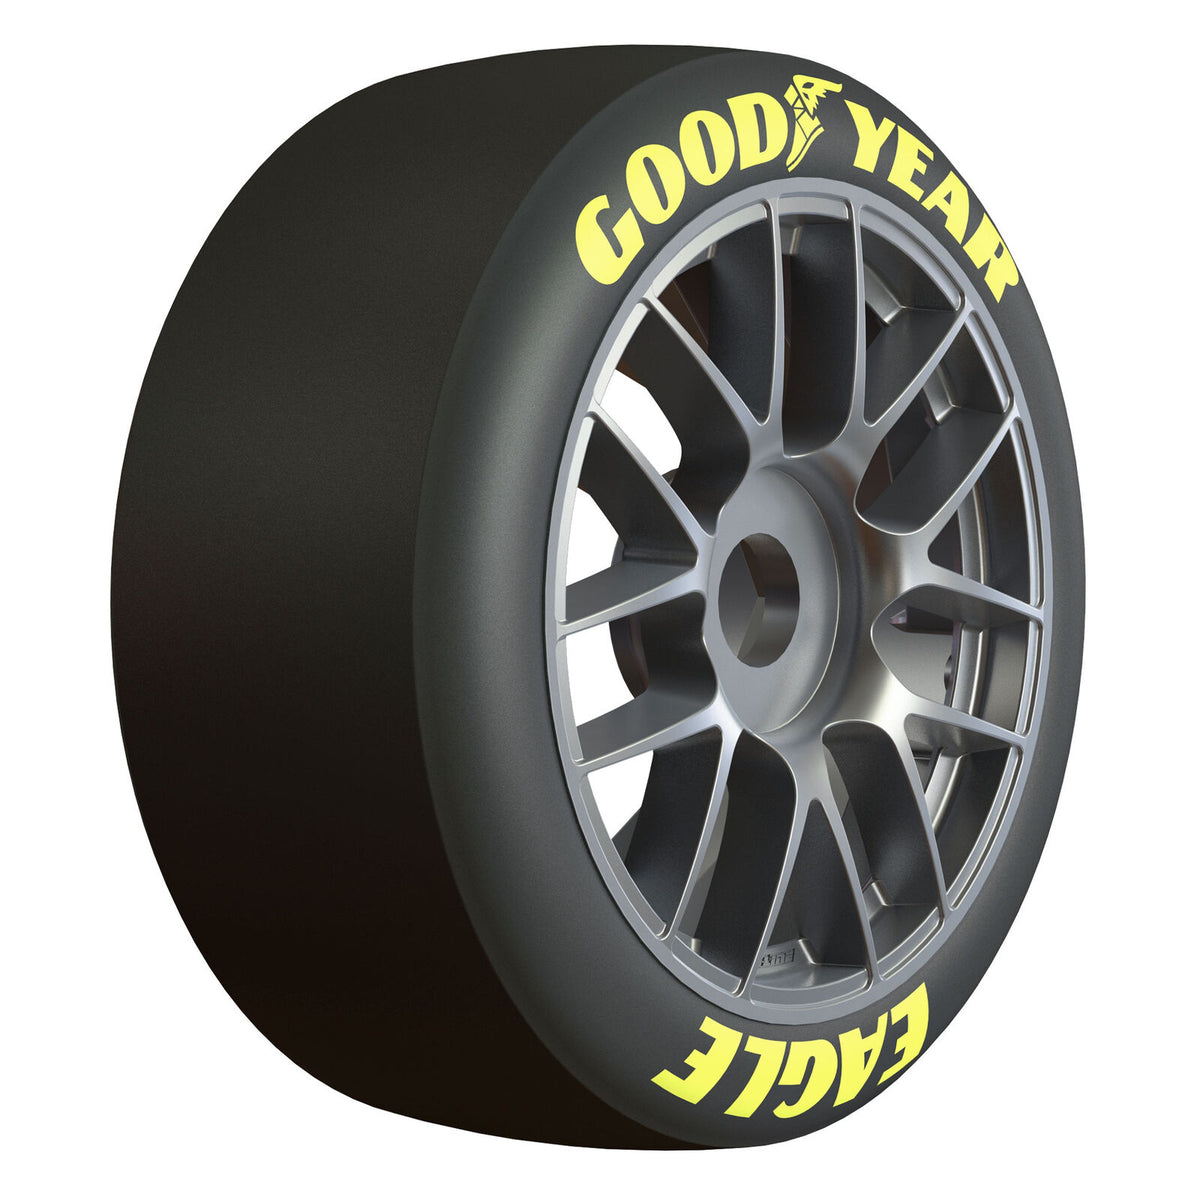 1/7 Goodyear NASCAR Cup F/R Belted MTD 17mm Gunmetal: Infraction 6S - PRO1023311